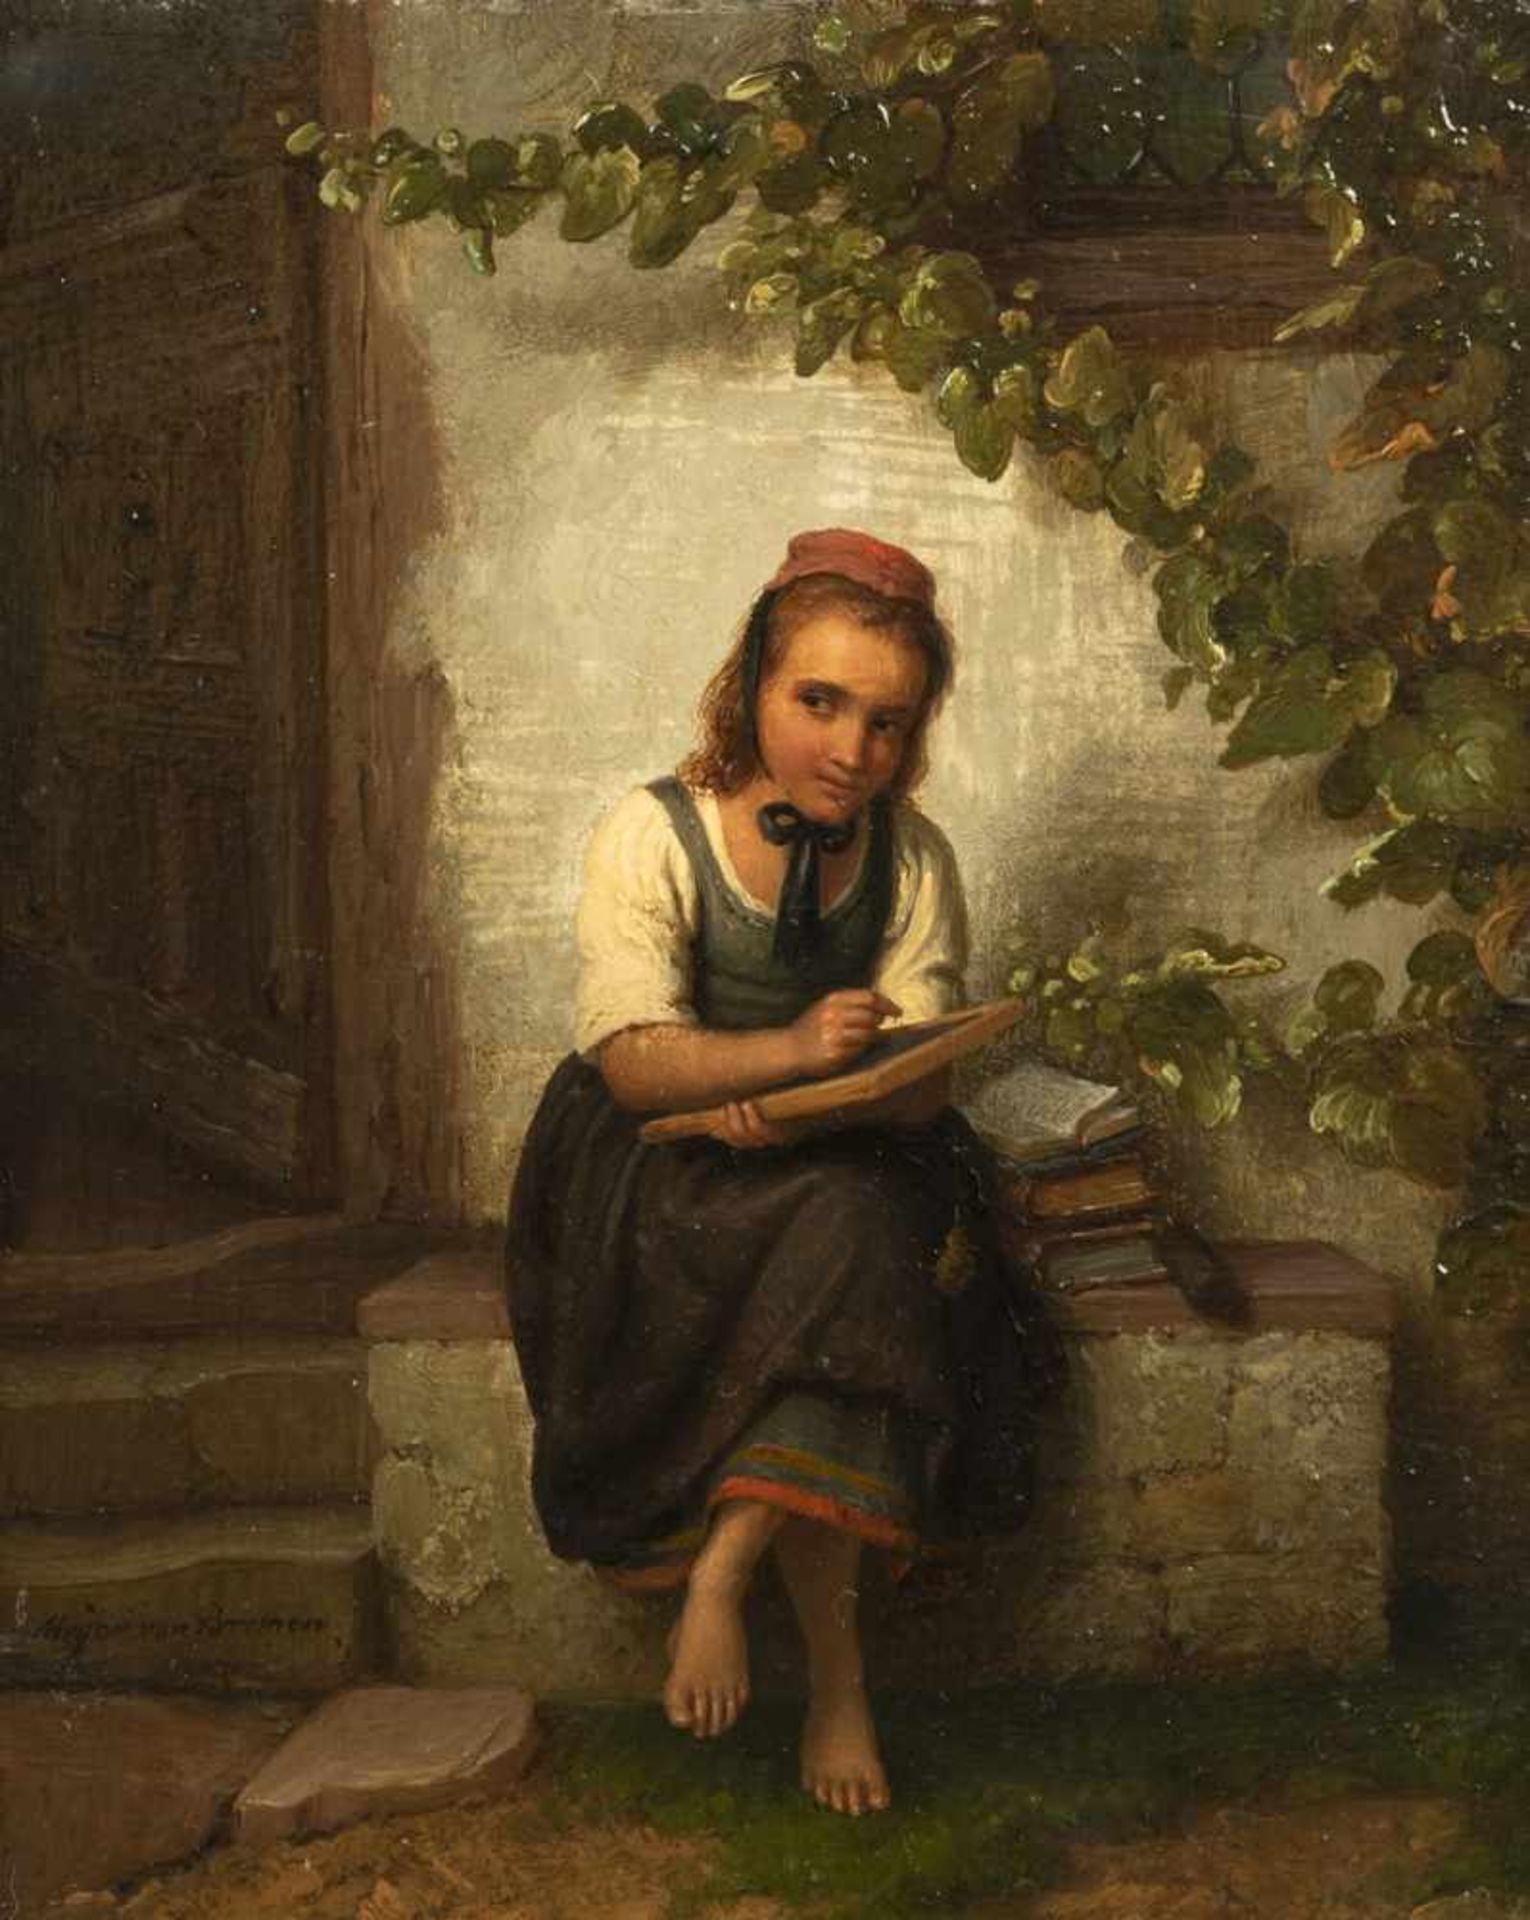 MEYER VON BREMEN, JOHANN GEORG (1813-1886). A seating peasant girl with a blackboard at a house